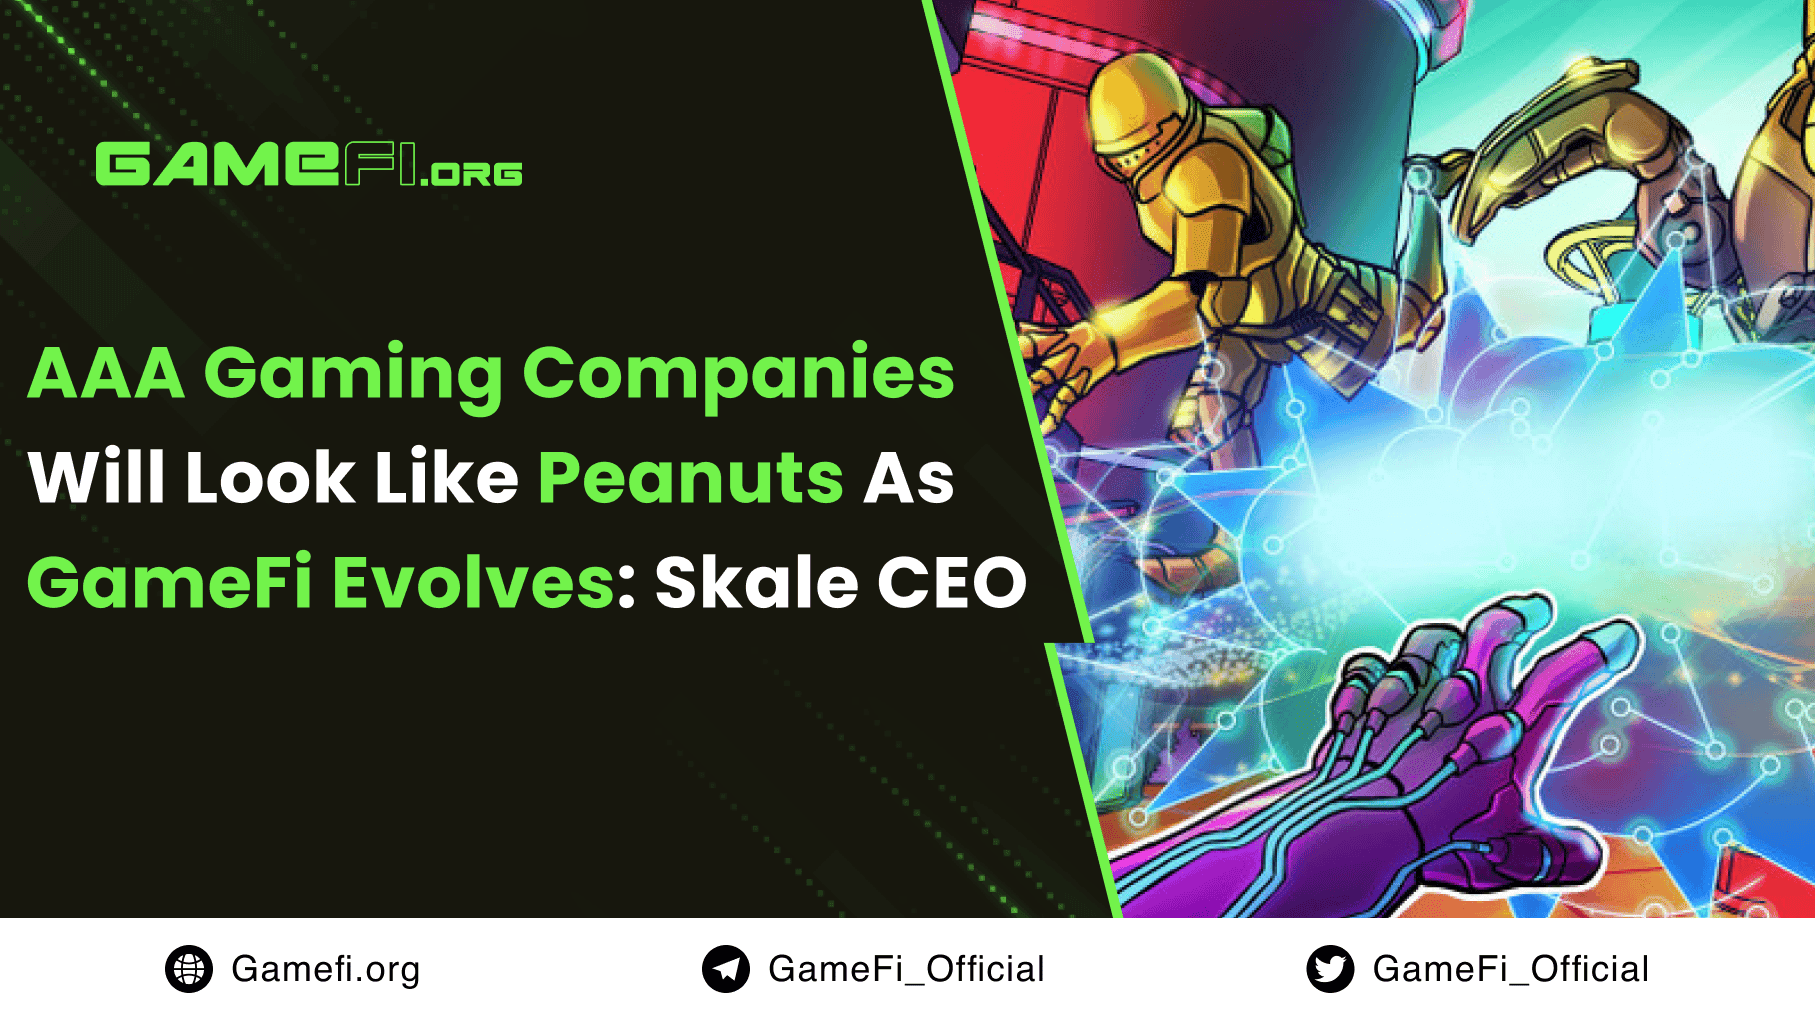 AAA Gaming Companies Will Look Like Peanuts as GameFi Evolves: Skale CEO